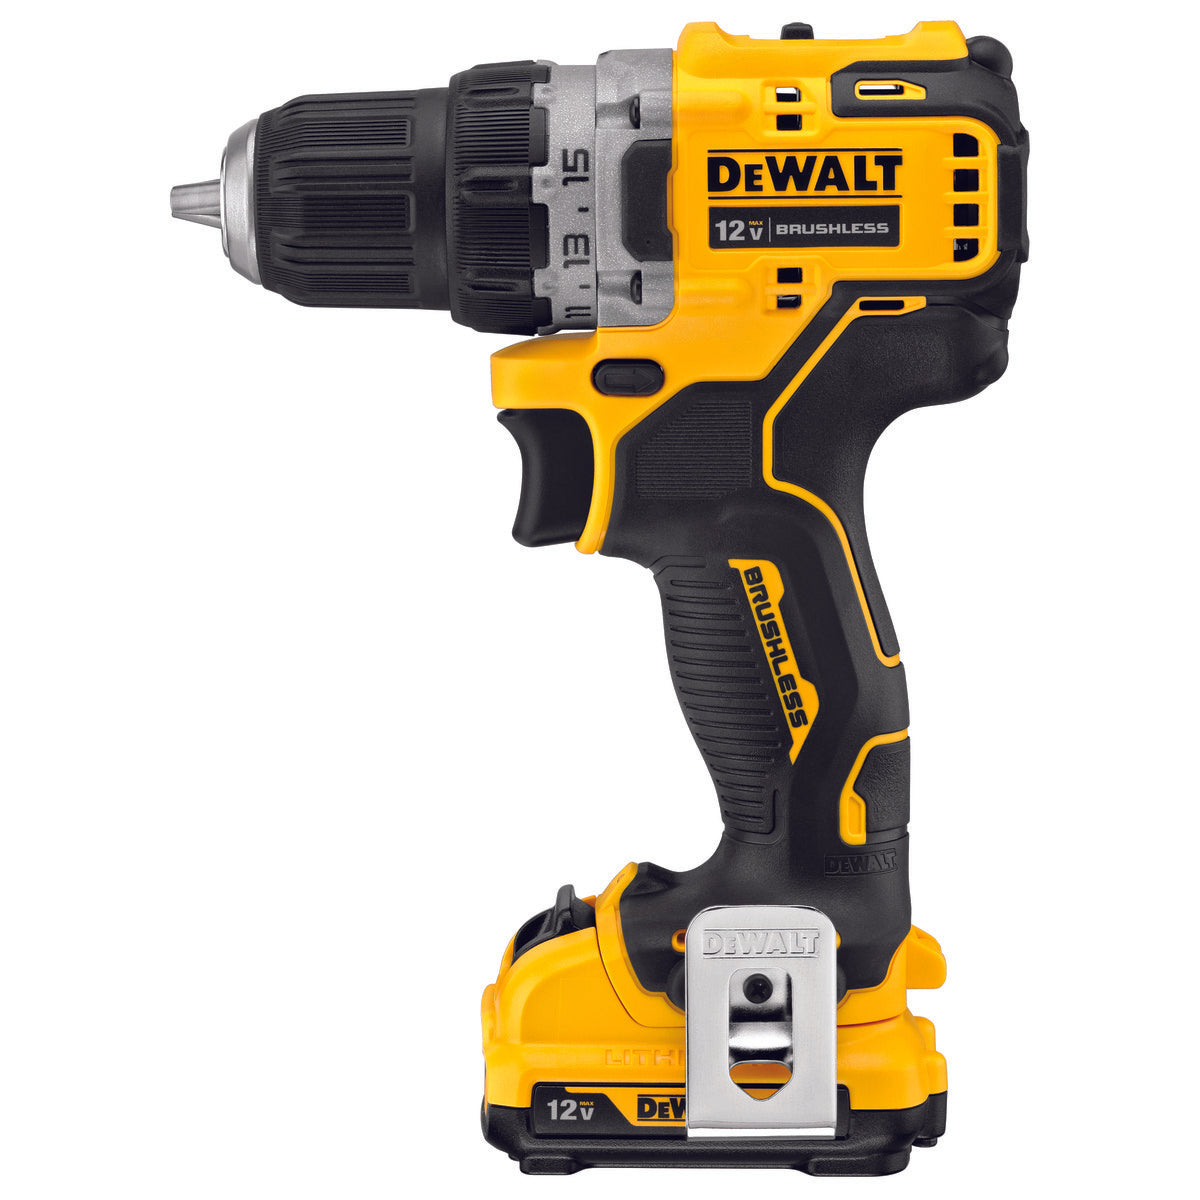 DEWALT DCD701F2 XTREME™ 12V MAX* BRUSHLESS 3/8 IN. CORDLESS DRILL/DRIVER KIT - wise-line-tools